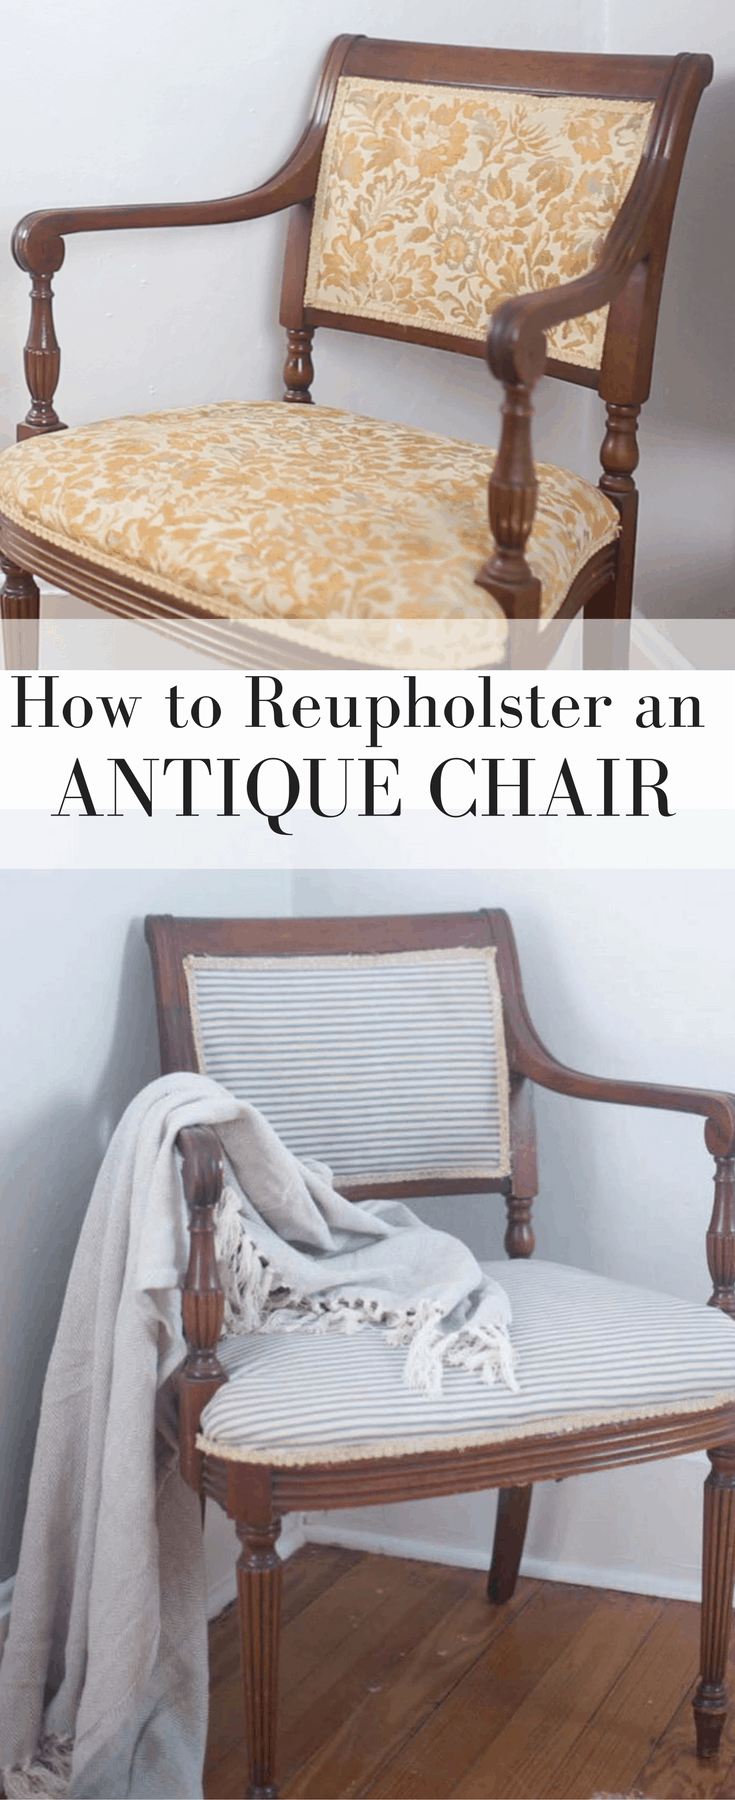 two pictures of an antique chair, before and after reupholstering in blue and white ticking stripe - how to reupholster a chair